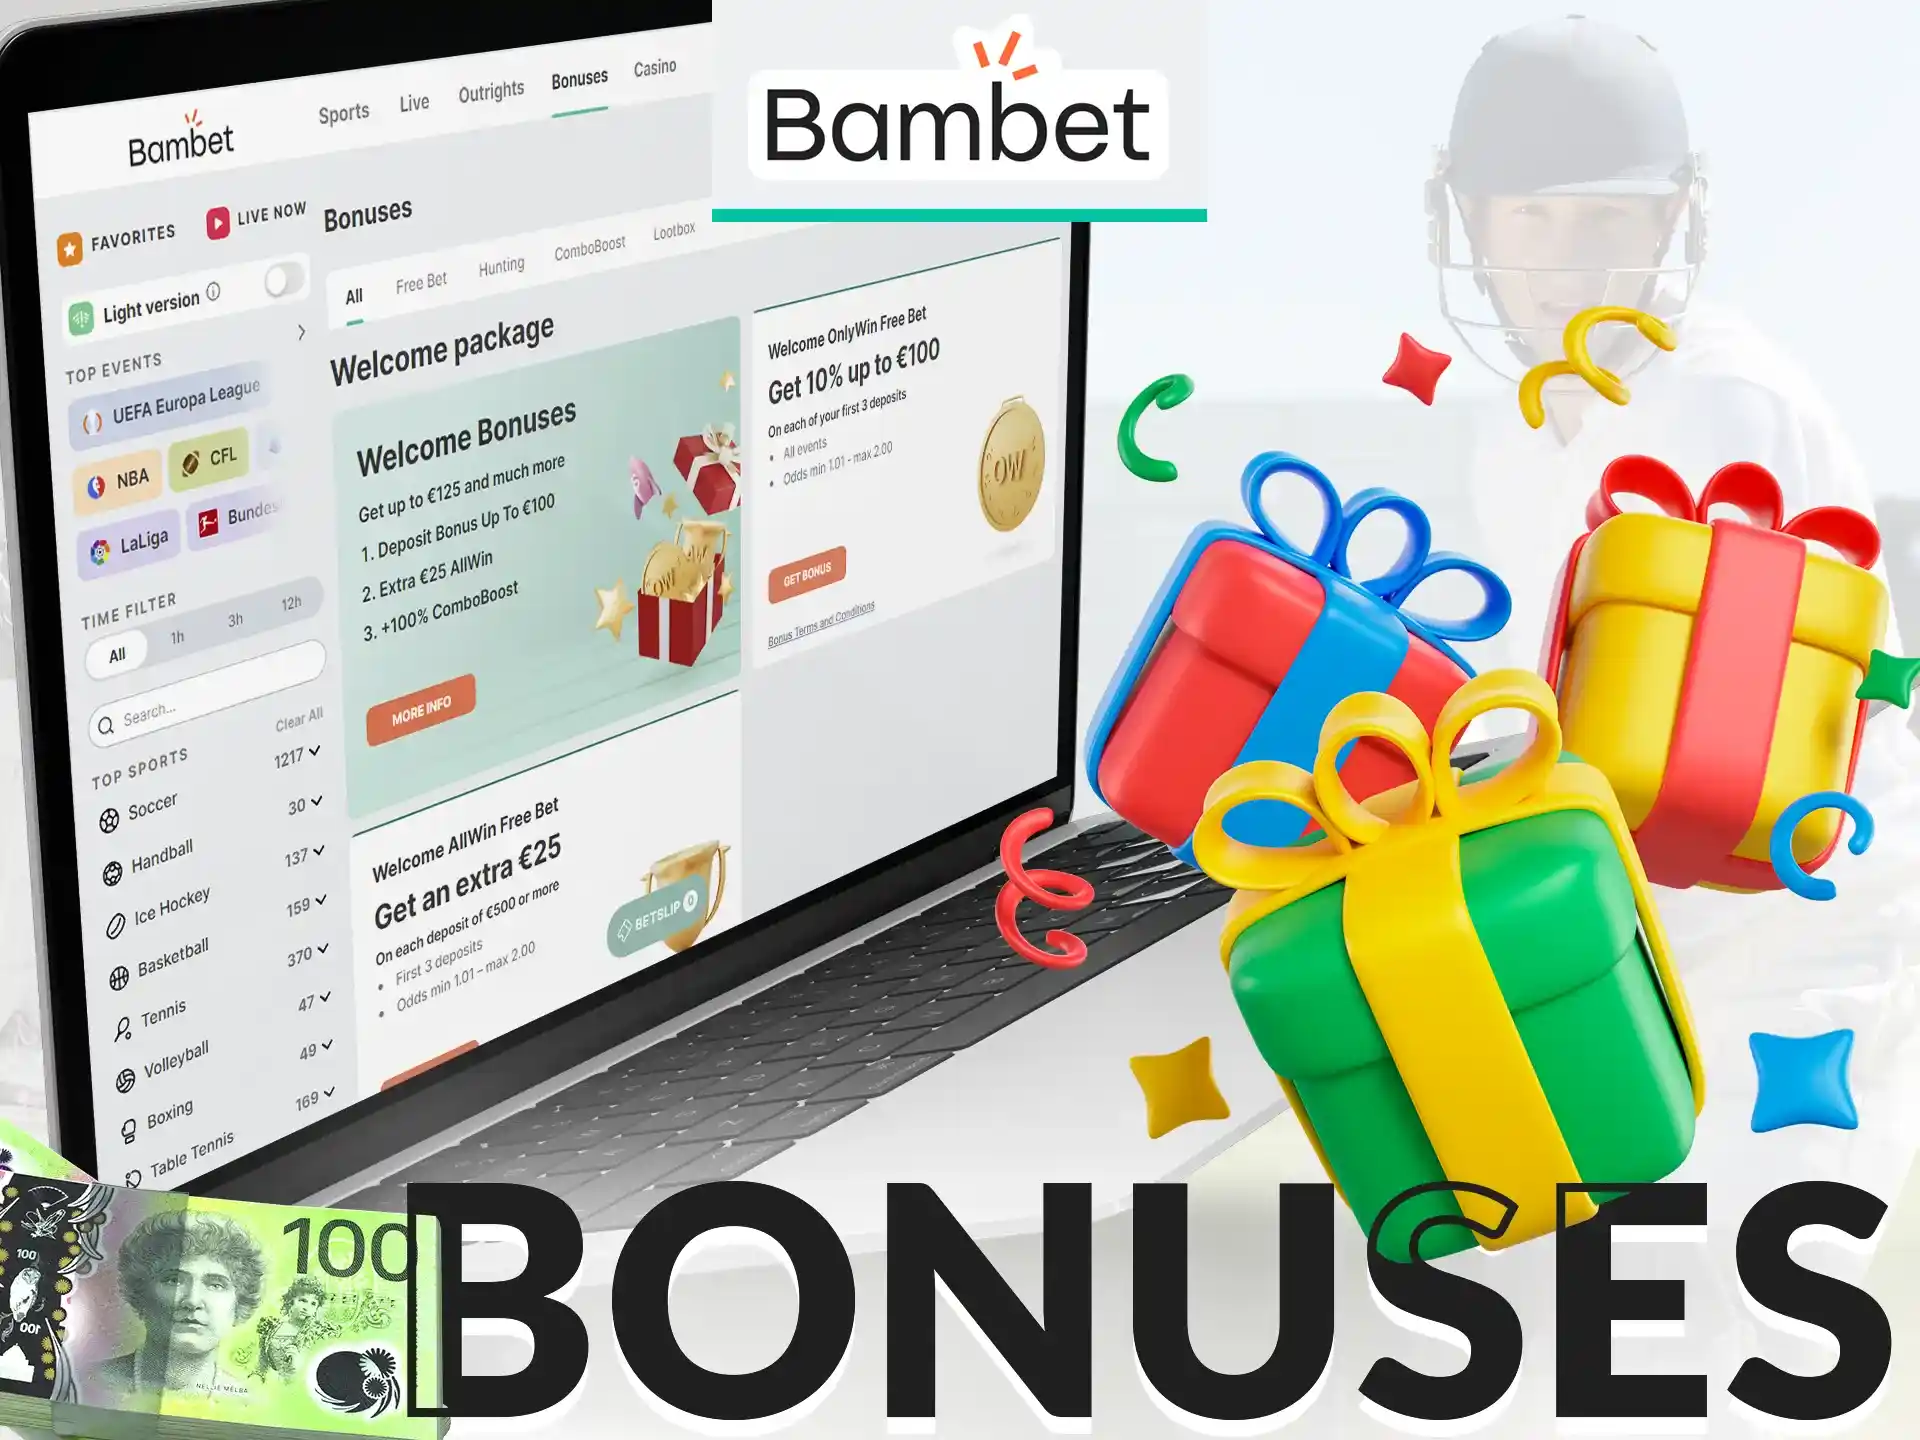 After making a deposit, Bambet offers various bonuses for new and regular players.